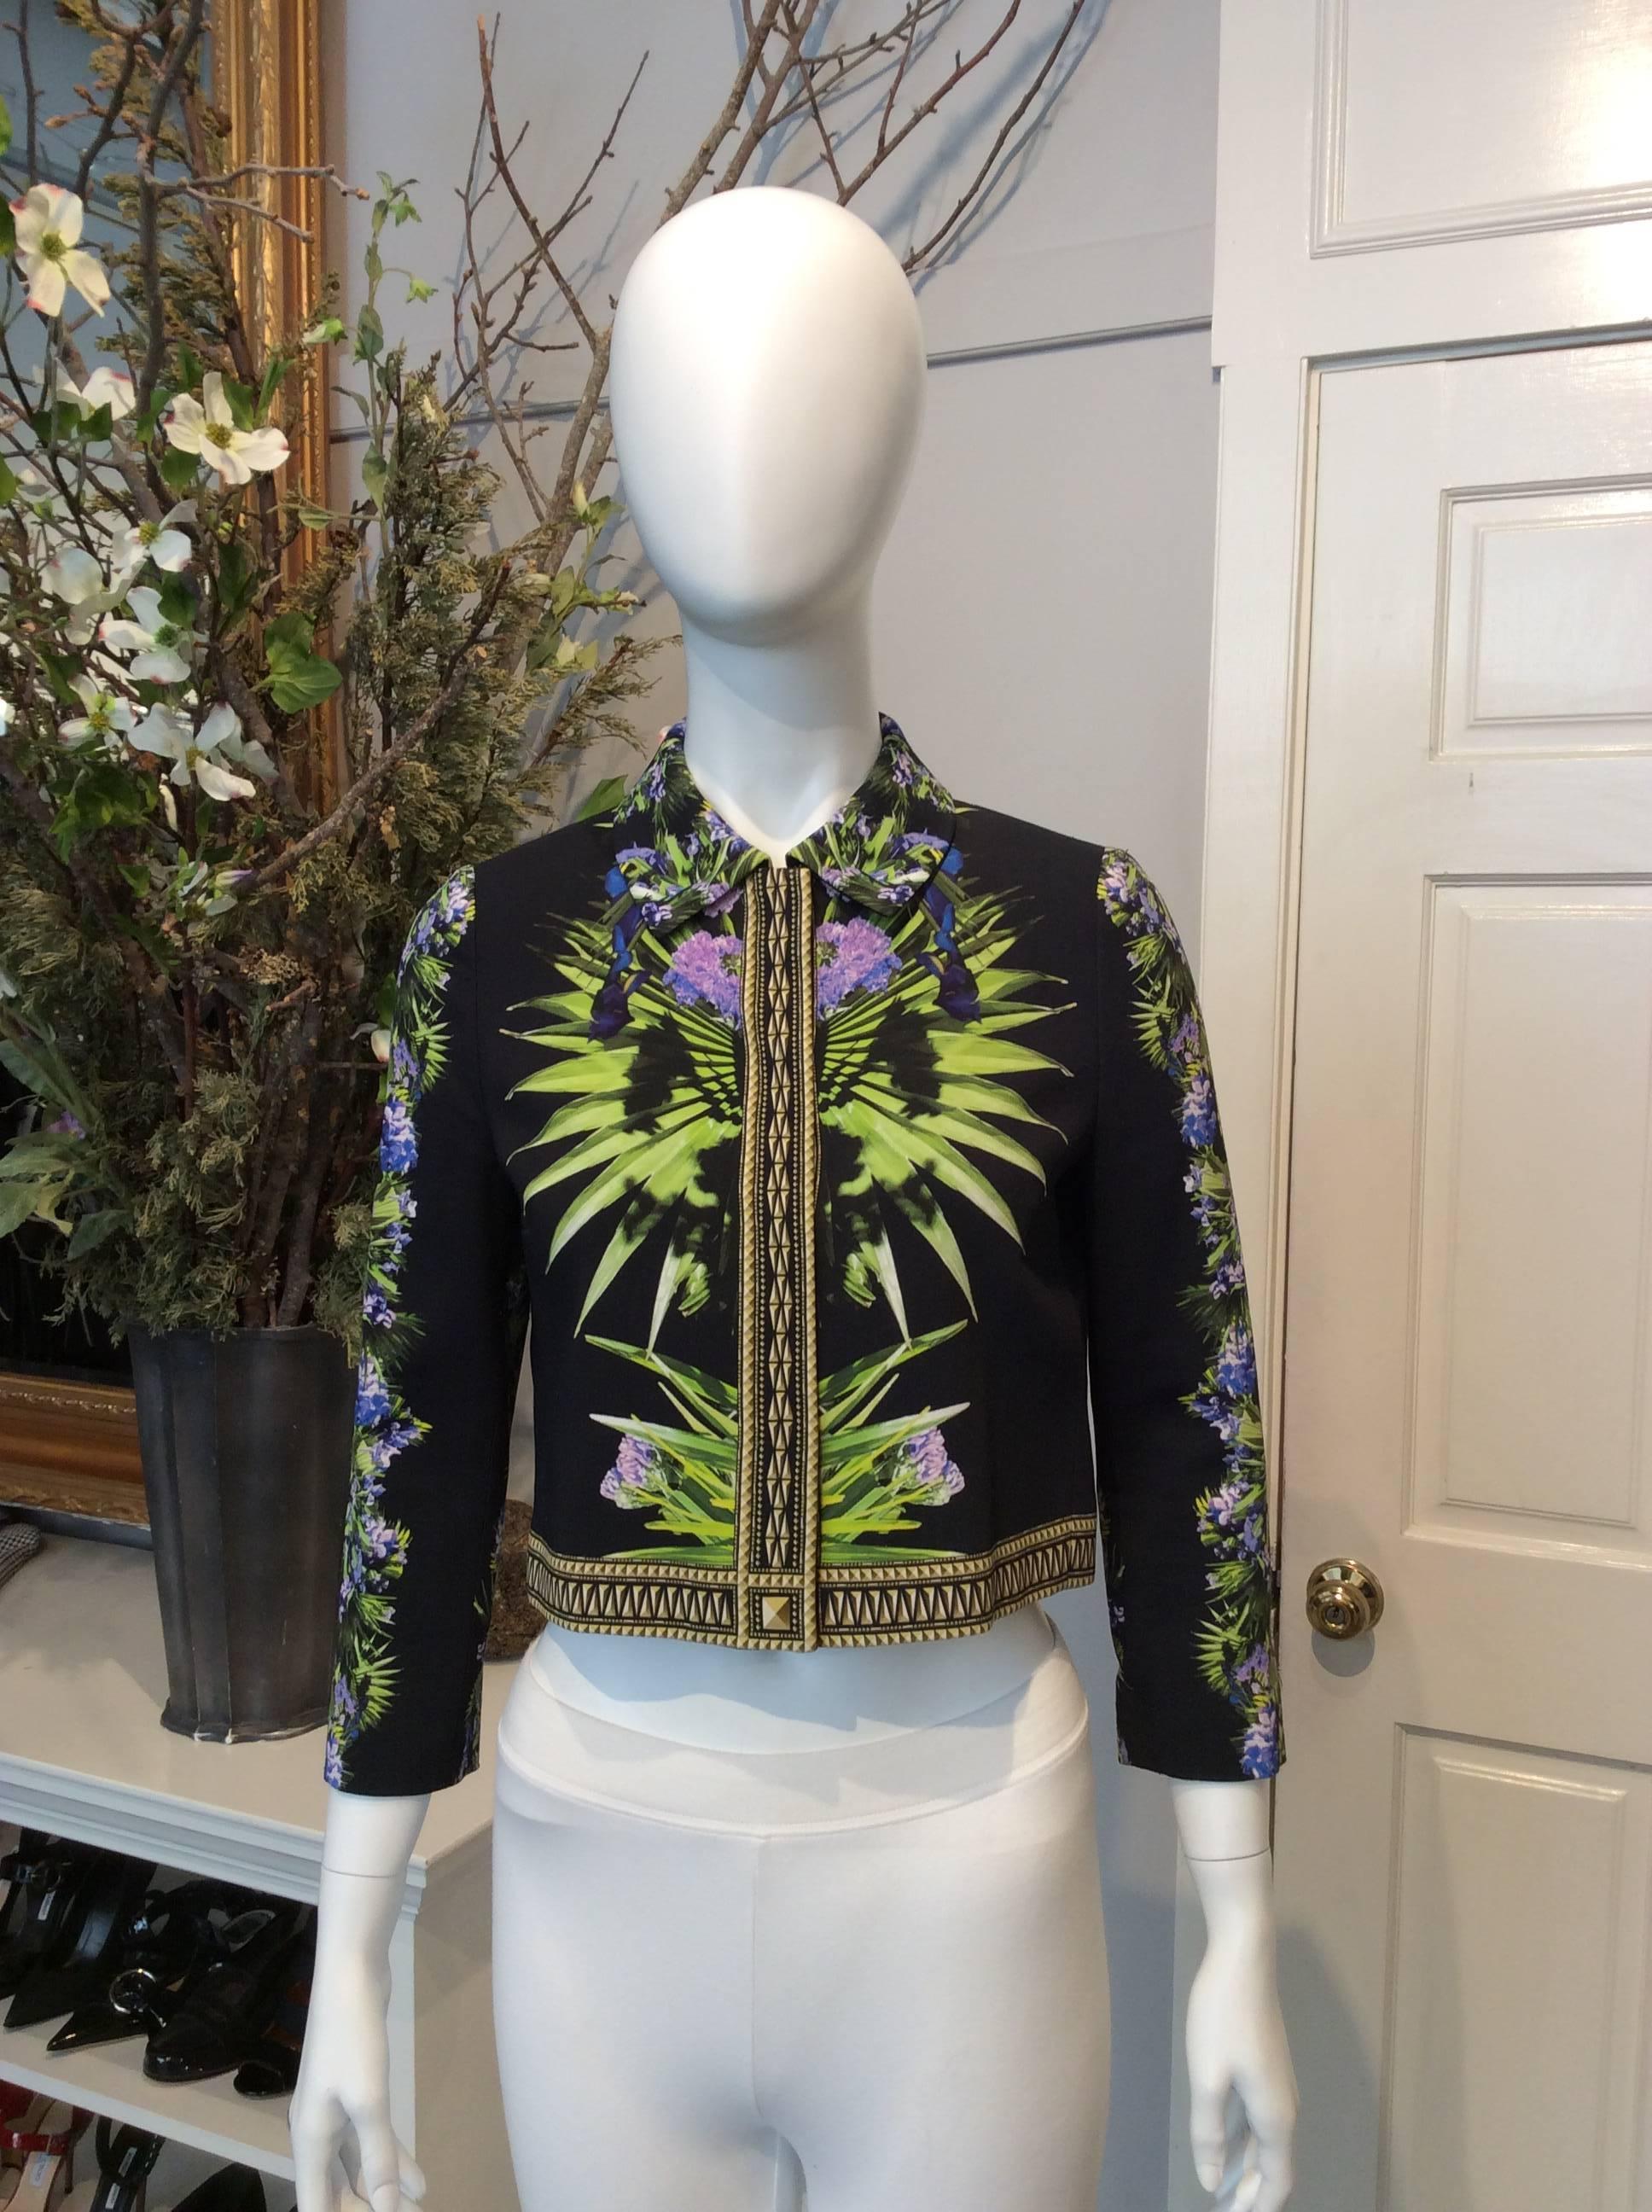 Givenchy black cropped jacket with purple and green floral pattern throughout, including length of sleeves. Yellow and gold trim. Concealed button closures down front of jacket. 

Sizing: Fr36, Us4

Fabric content: 96% Viscose, 4% Elastane. Body